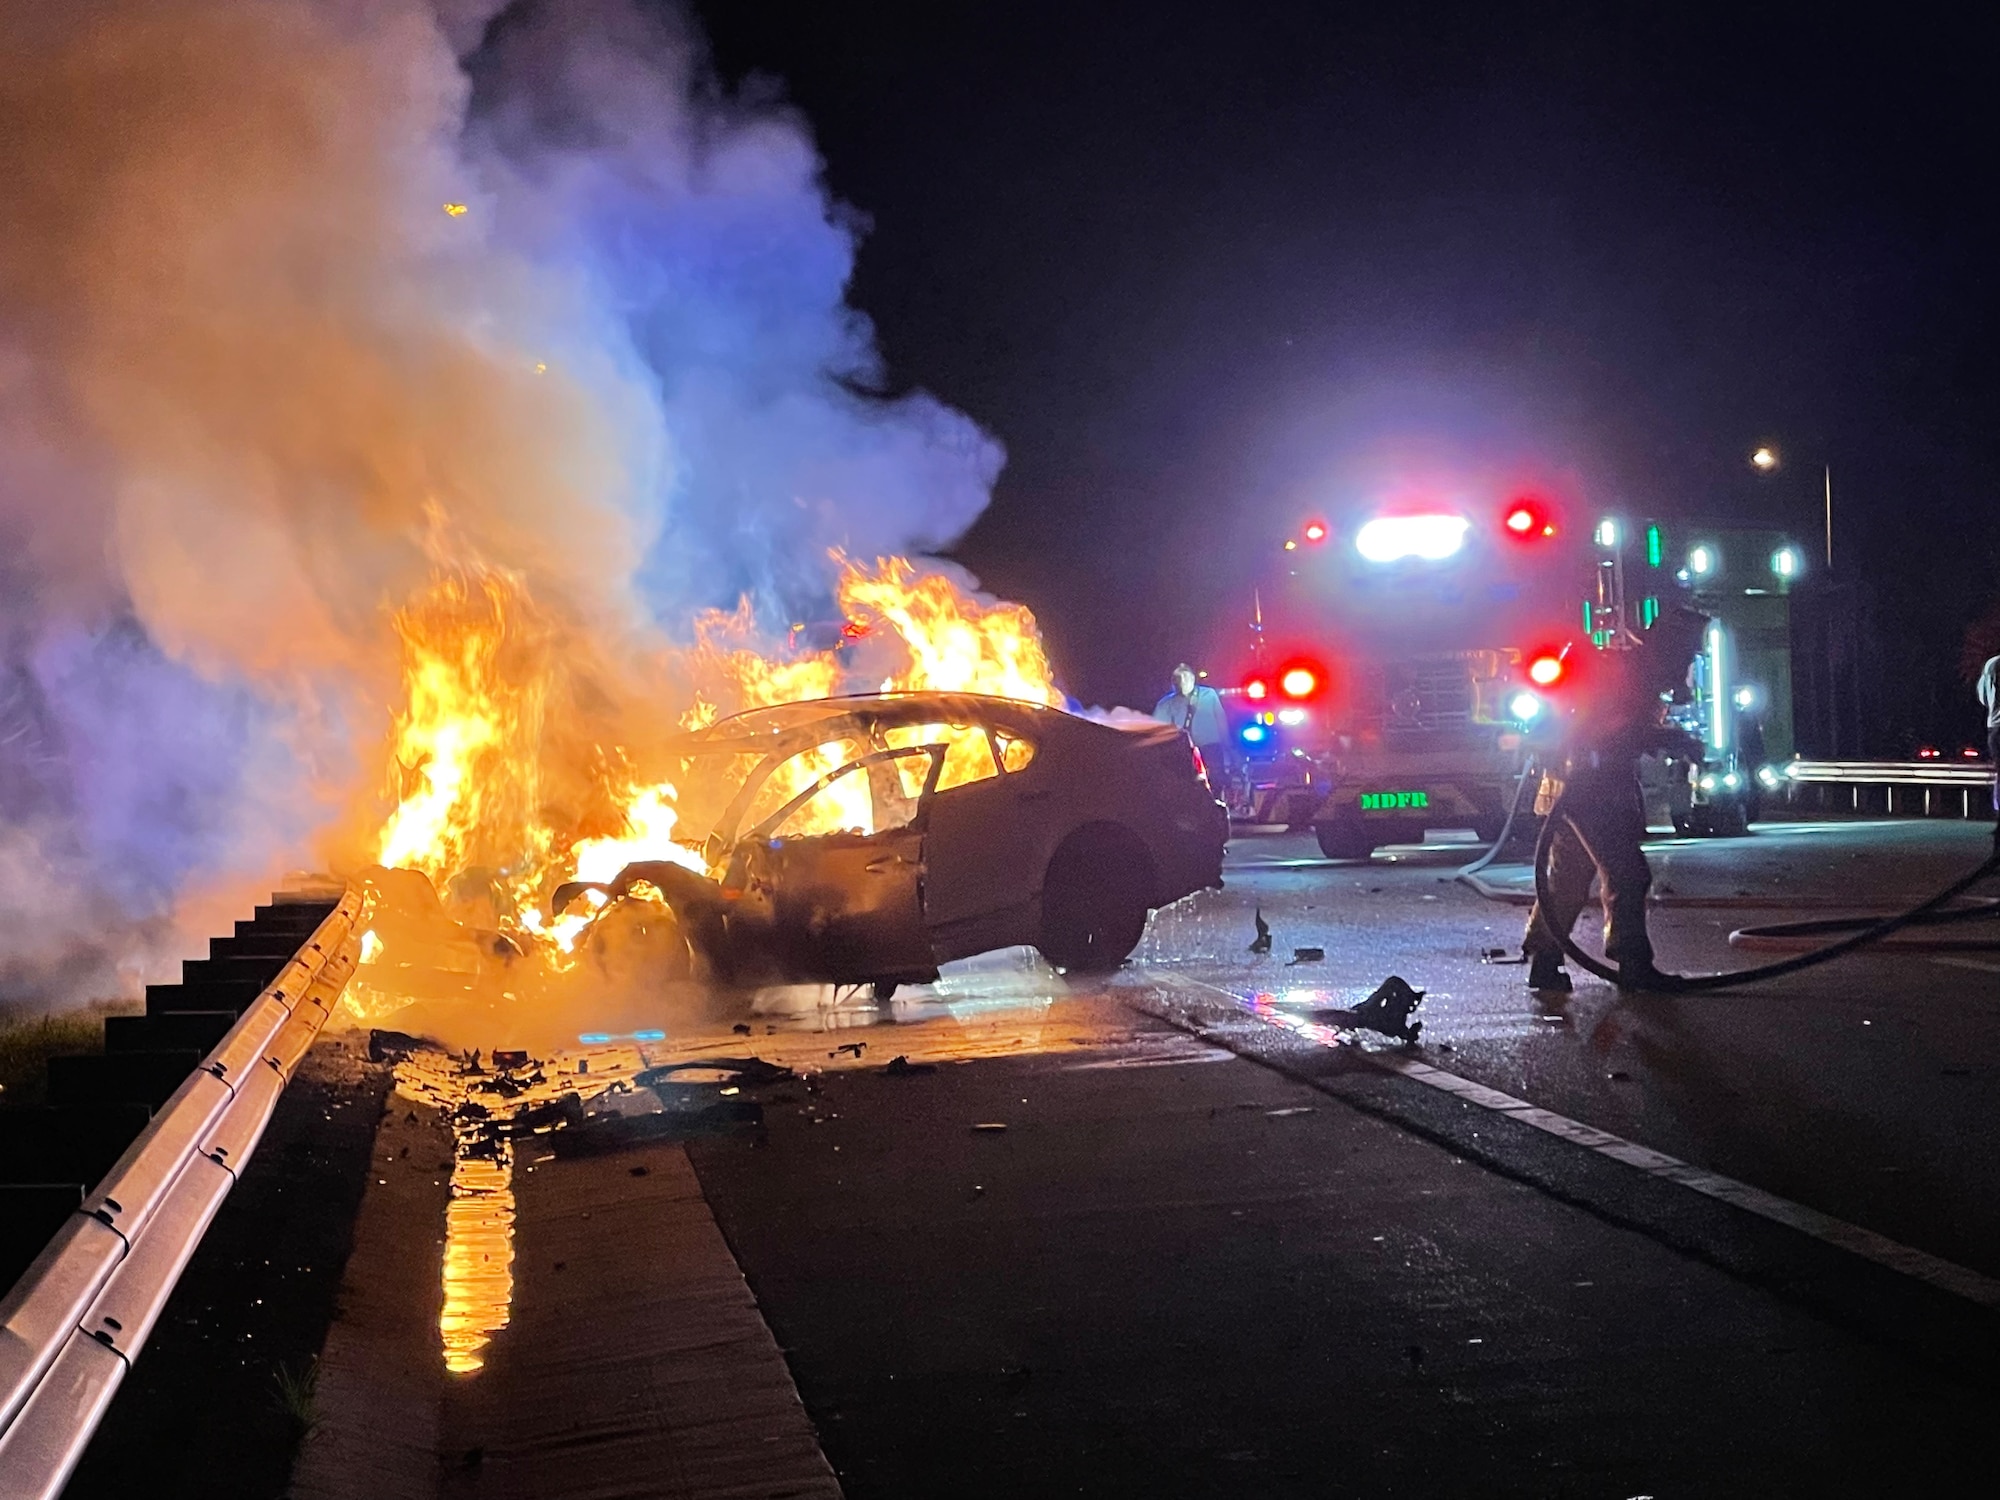 Scene of fiery car crash where Tech. Sgt. Leo Castellno, 482nd Fighter Wing Public Affairs Specialist, and Senior Airman Randy Rodriguez, 70th Aerial Port Squadron Aerial Porter, saved a woman in the early hours of Sept. 10, 2022. (Courtesy photo by Senior Airman Randy Rodriguez)